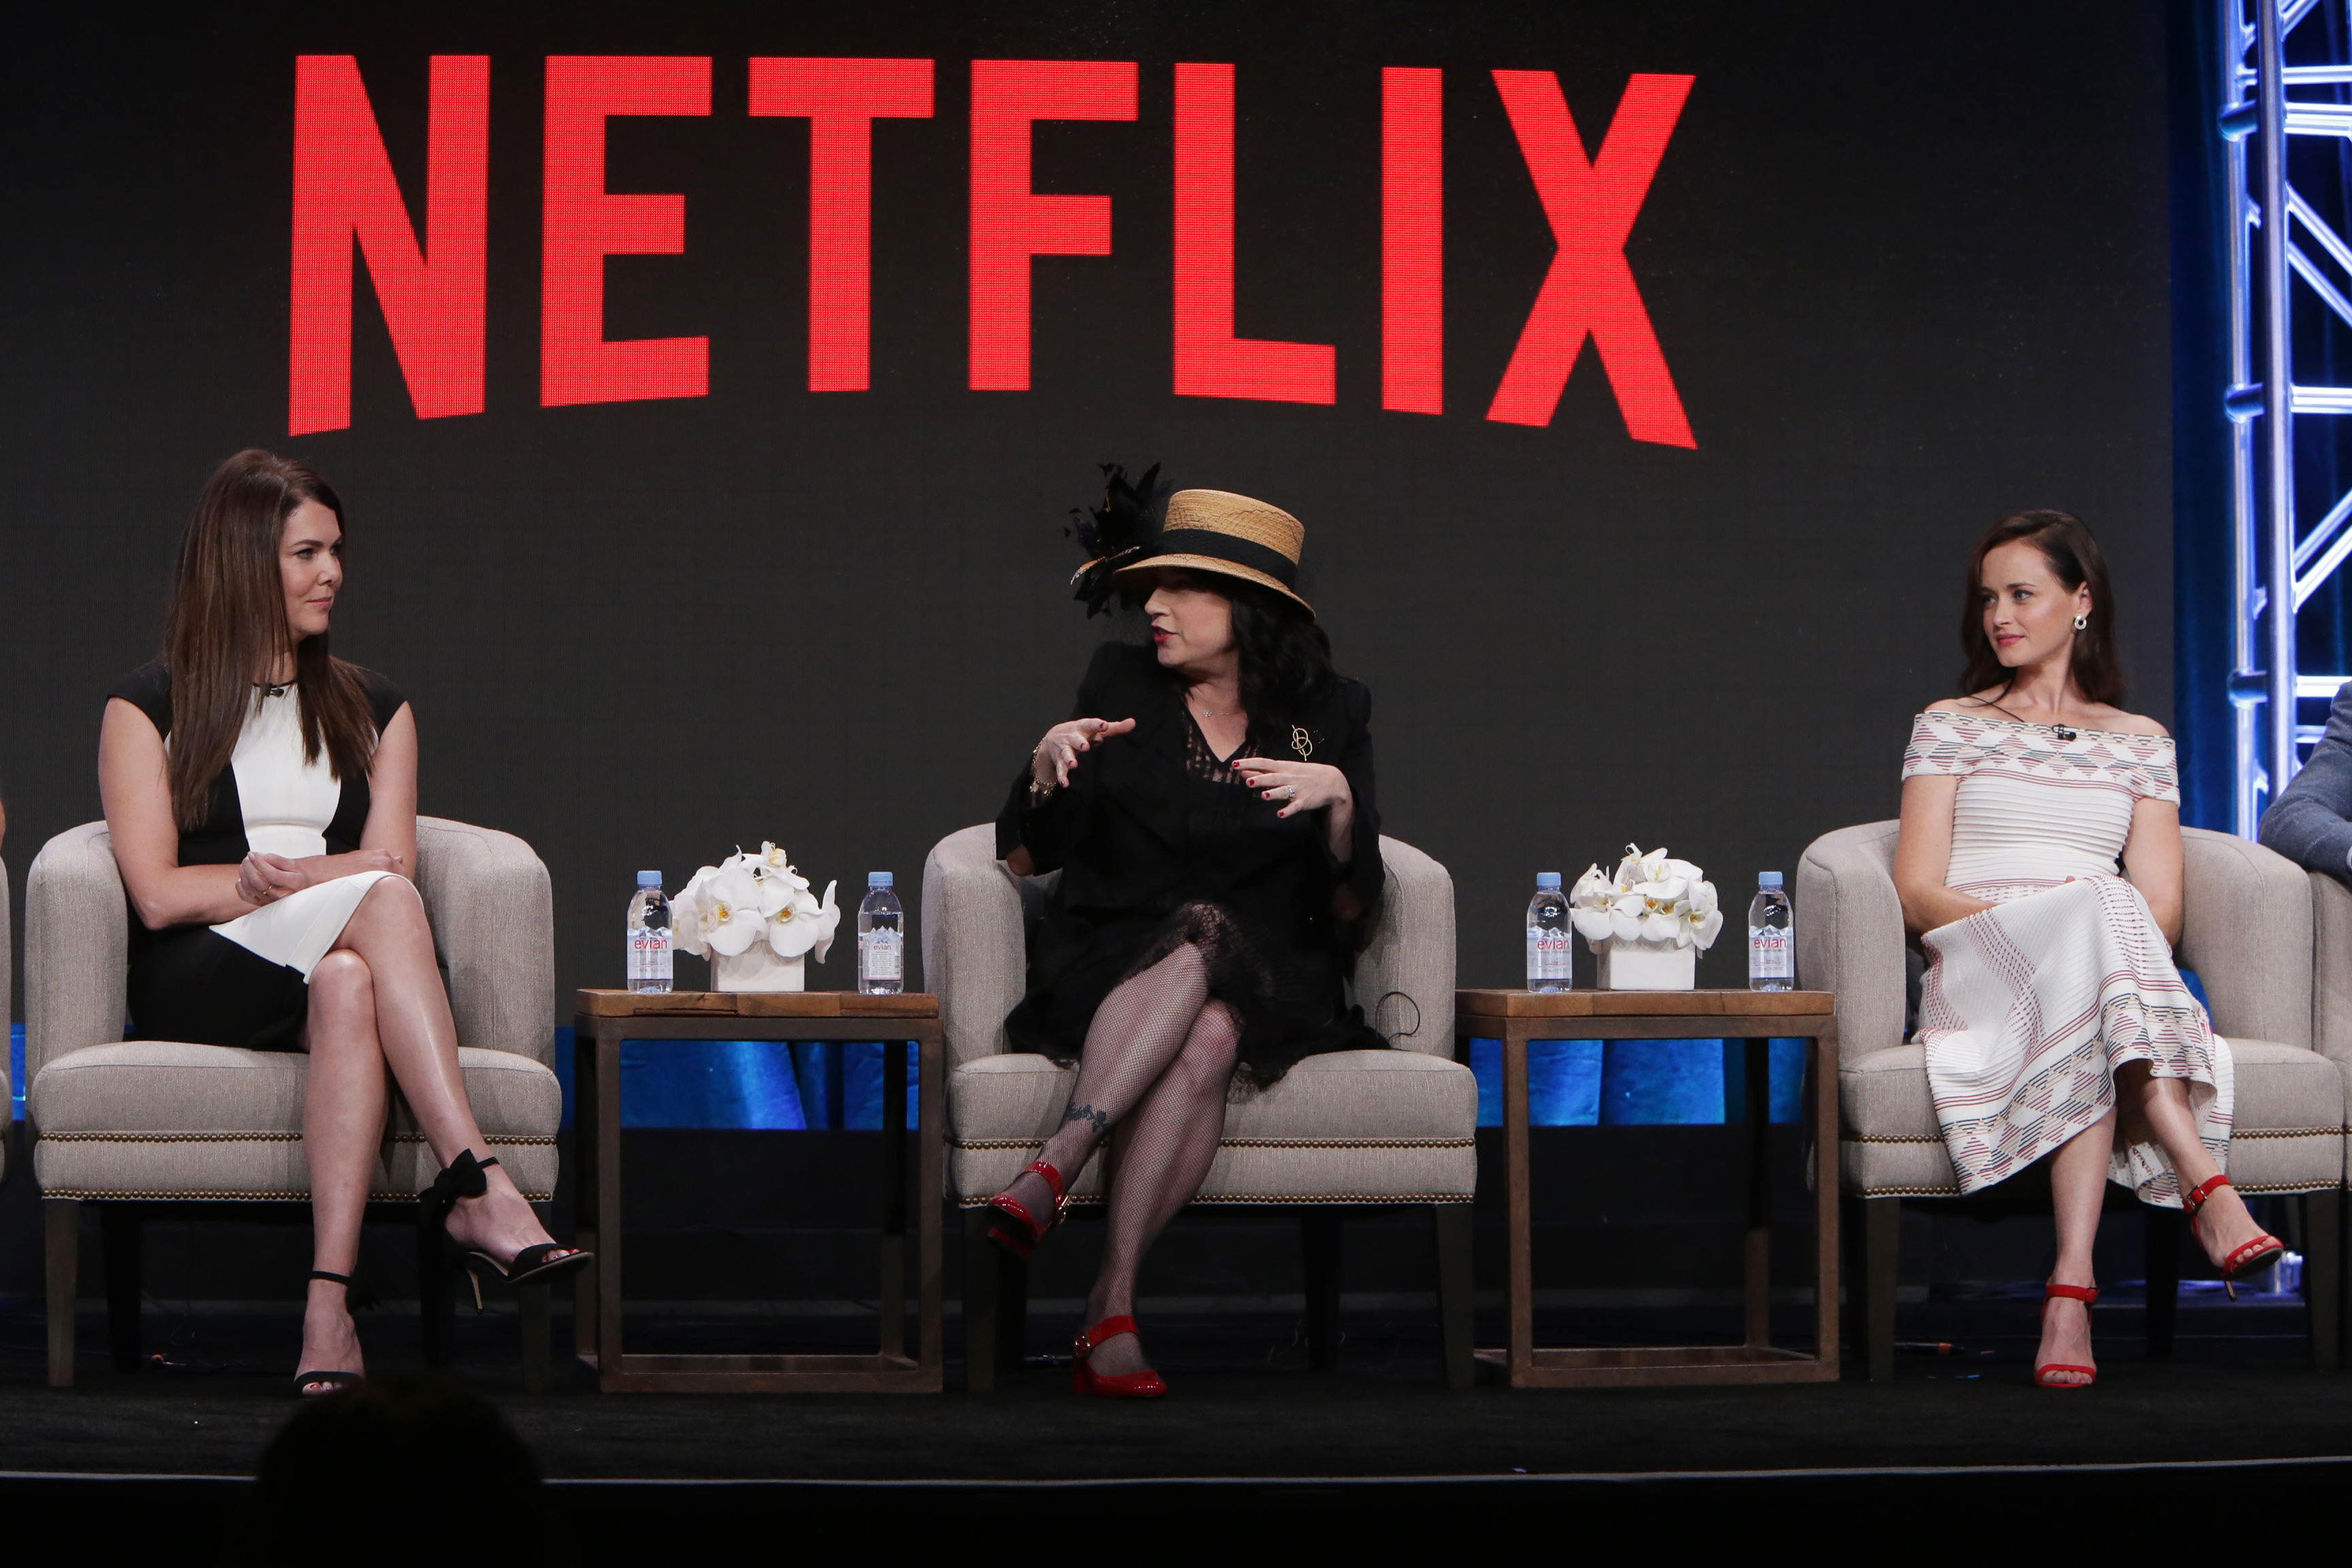 Lauren Graham, Amy Sherman-Palladino, and Alexis Bledel discuss 'Gilmore Girls: A Year in the Life' at the Summer TCA at the Beverly Hilton Hotel